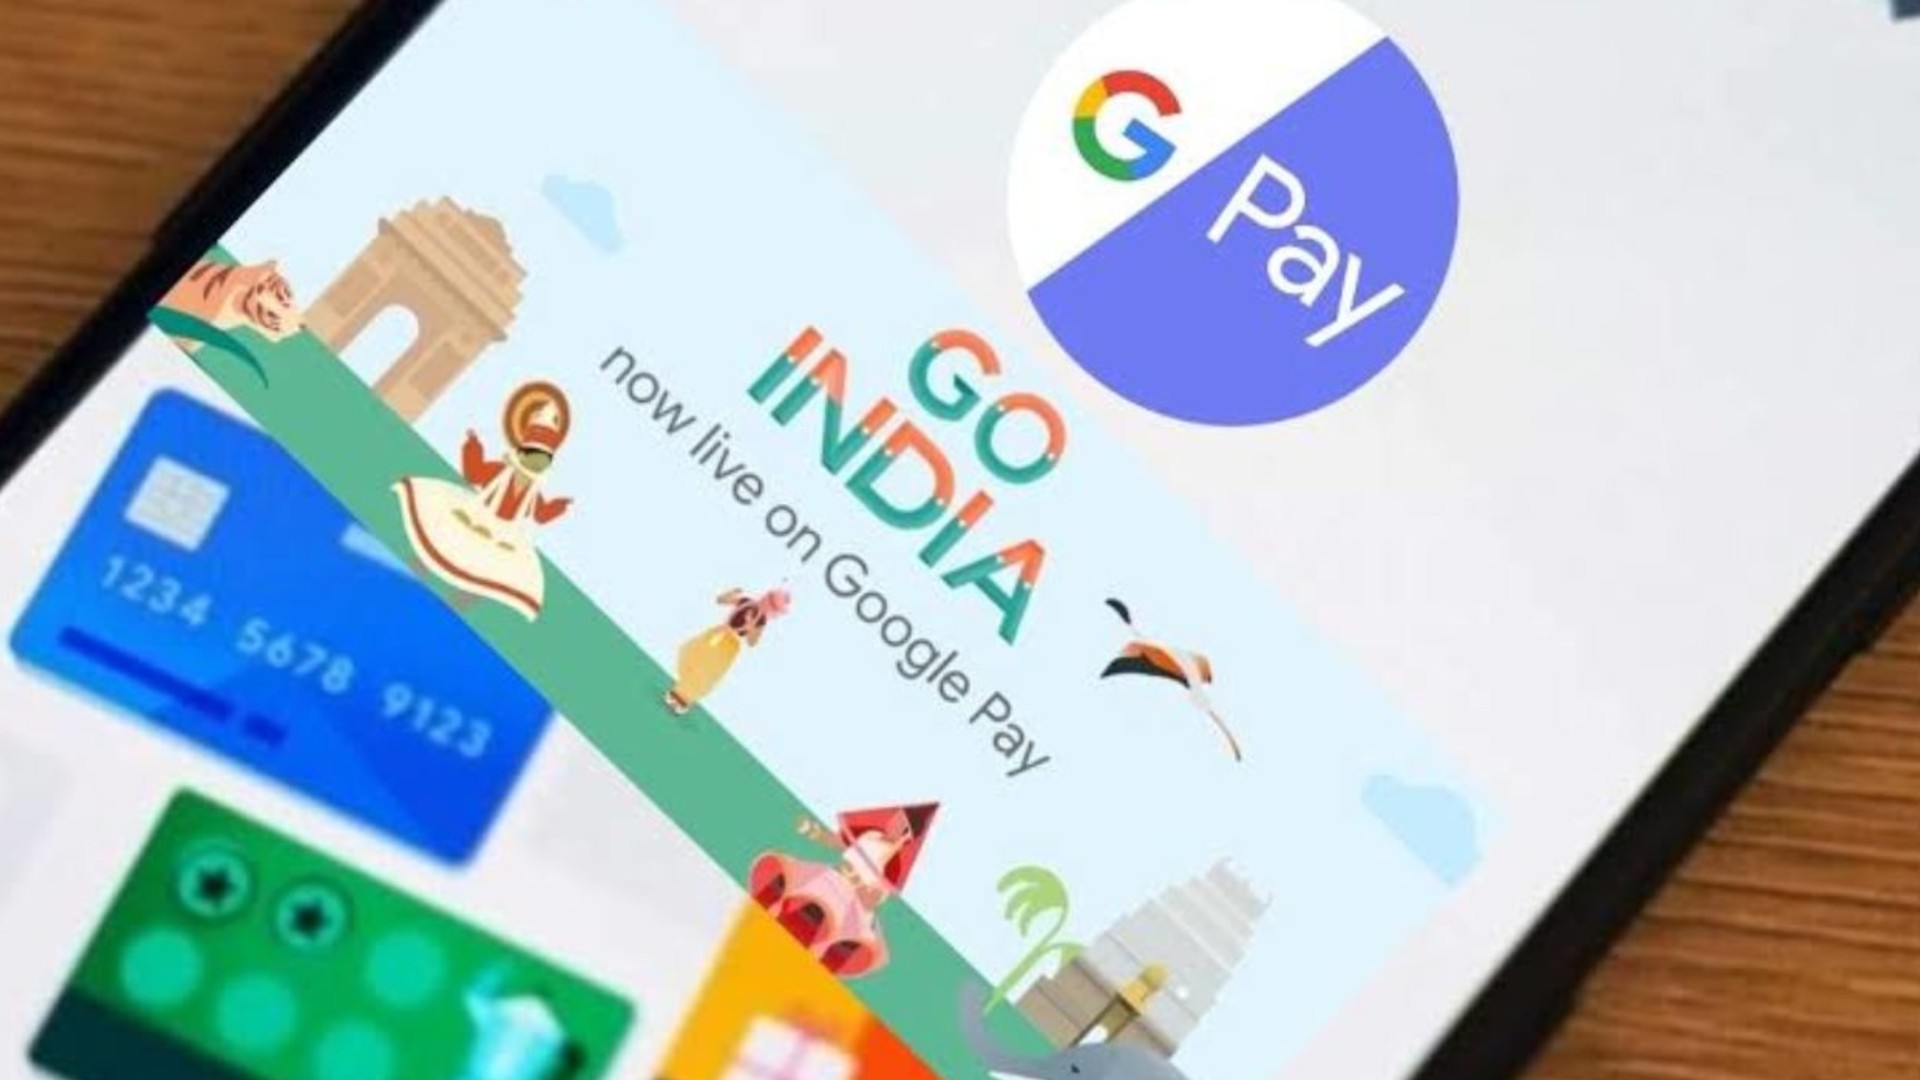 How It Works -Google Pay’s Tokenized Payments With Debit/Credit Cards are Supported by SBI, Axis, HSBC